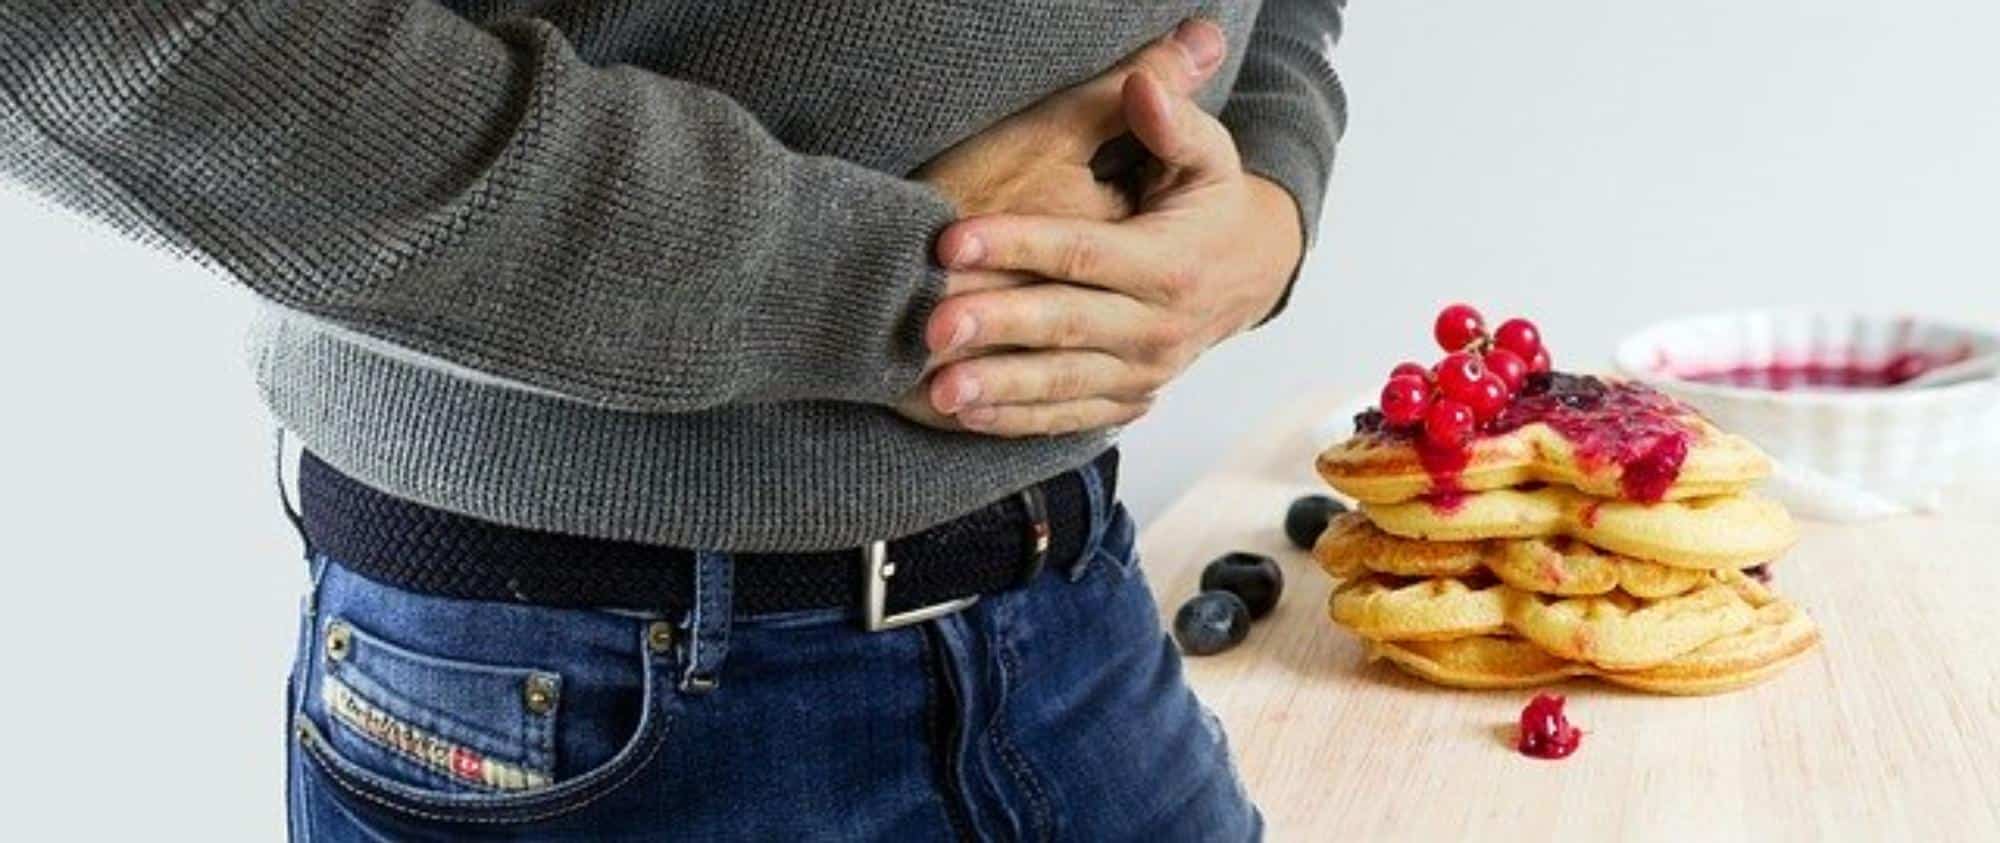 Eating disorders cause digestive distress